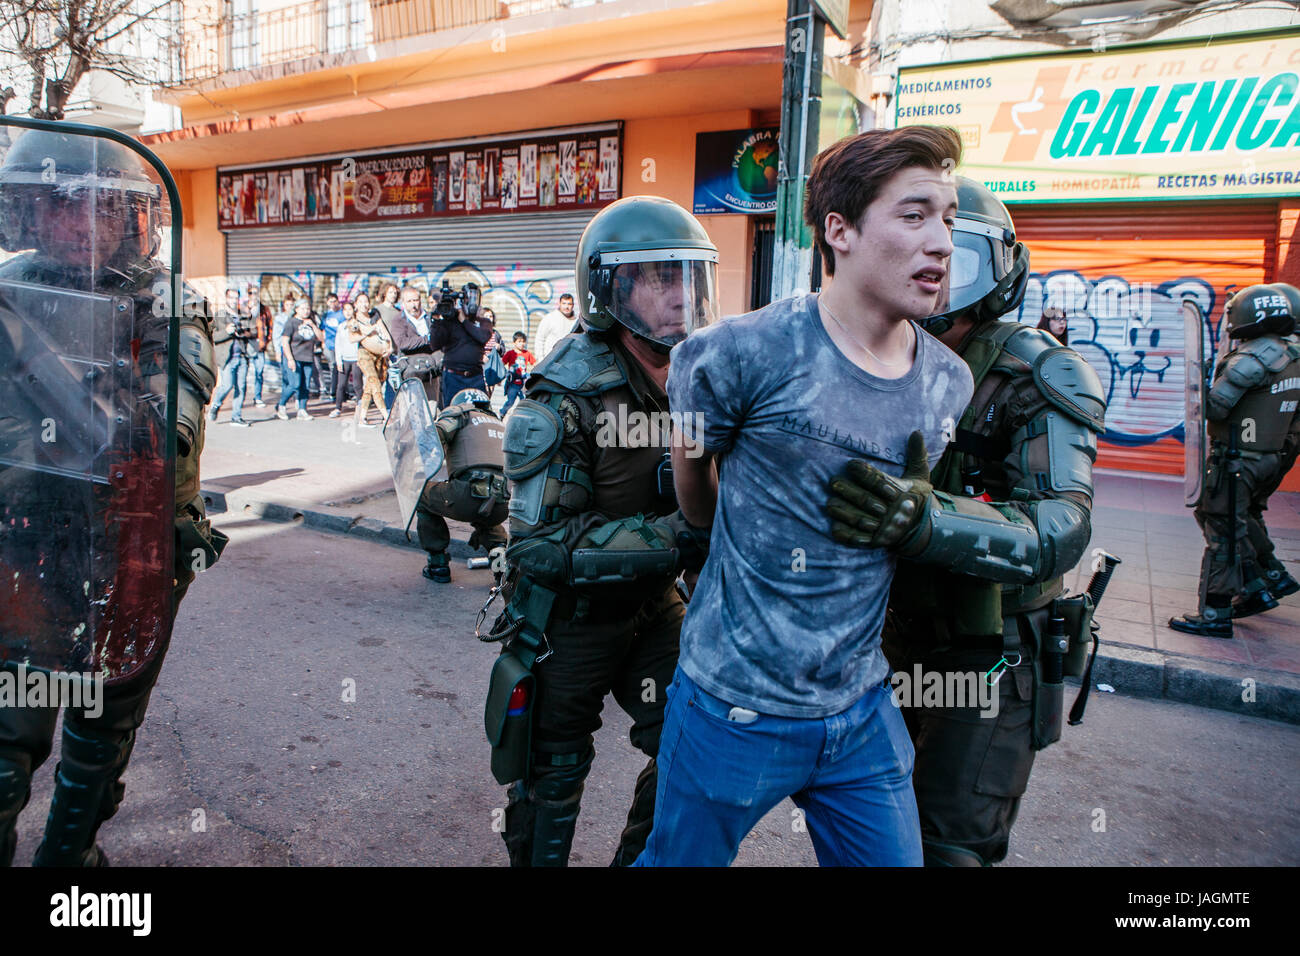 Valparaiso, Chile - June 01, 2017: Protester arrested by the chilean riot police during a protest in the center of Valparaiso, following President Mic Stock Photo